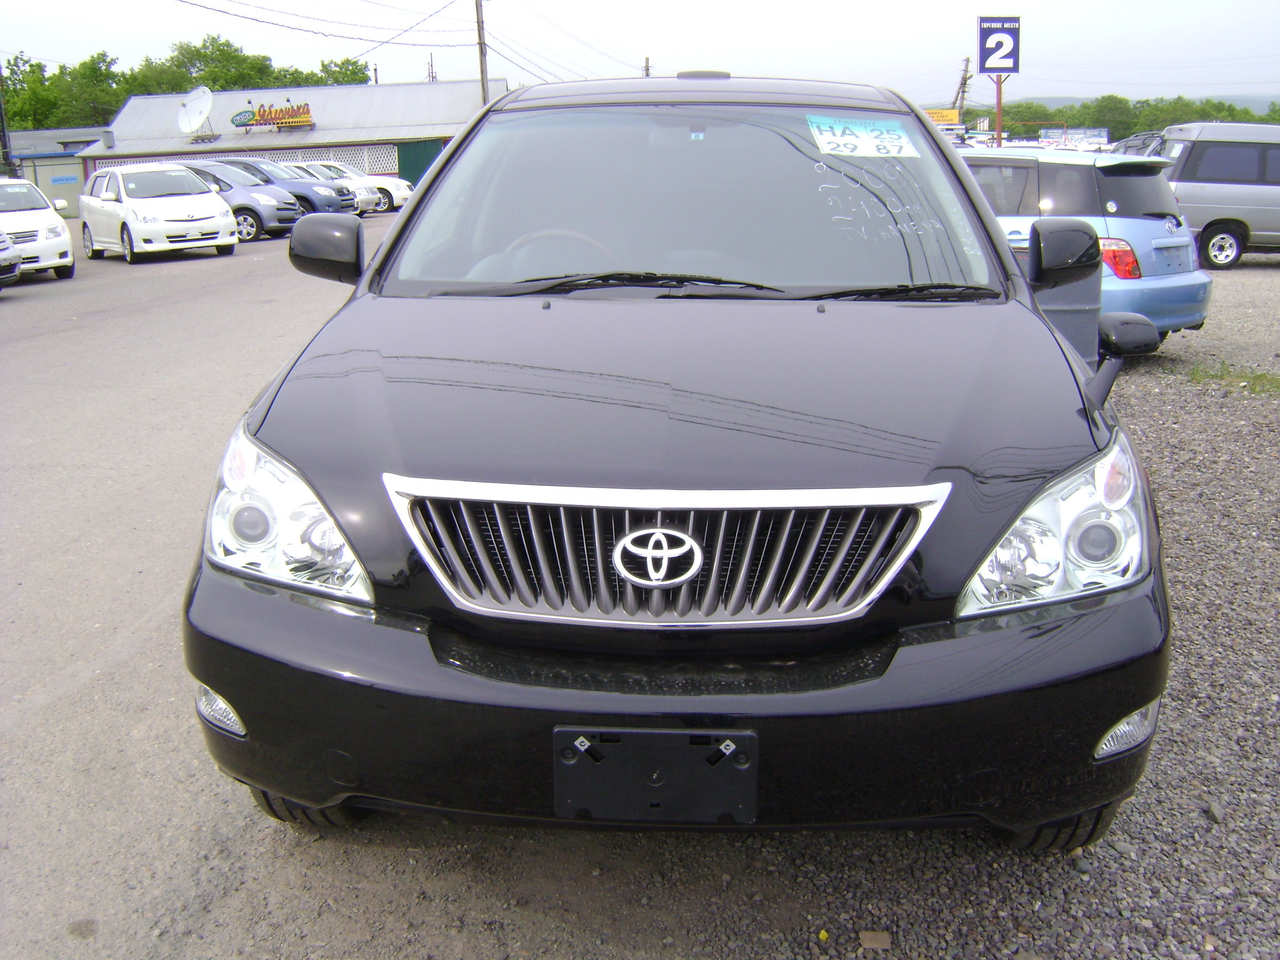 2009 Toyota harrier review